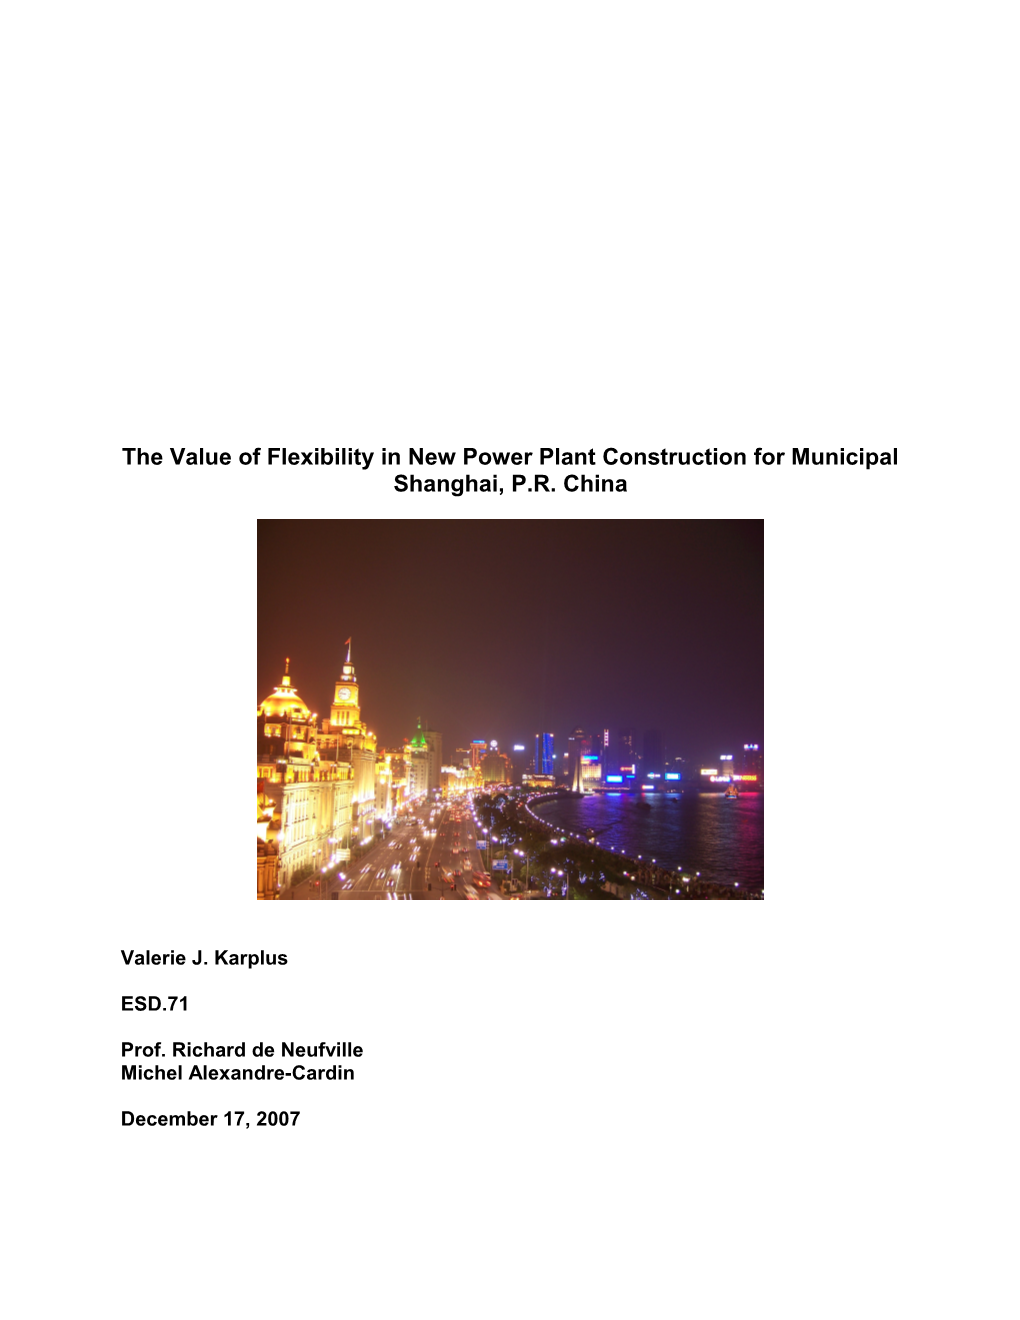 Examining the Value of Flexibility in Power Plant Construction for Municipal Shanghai, P